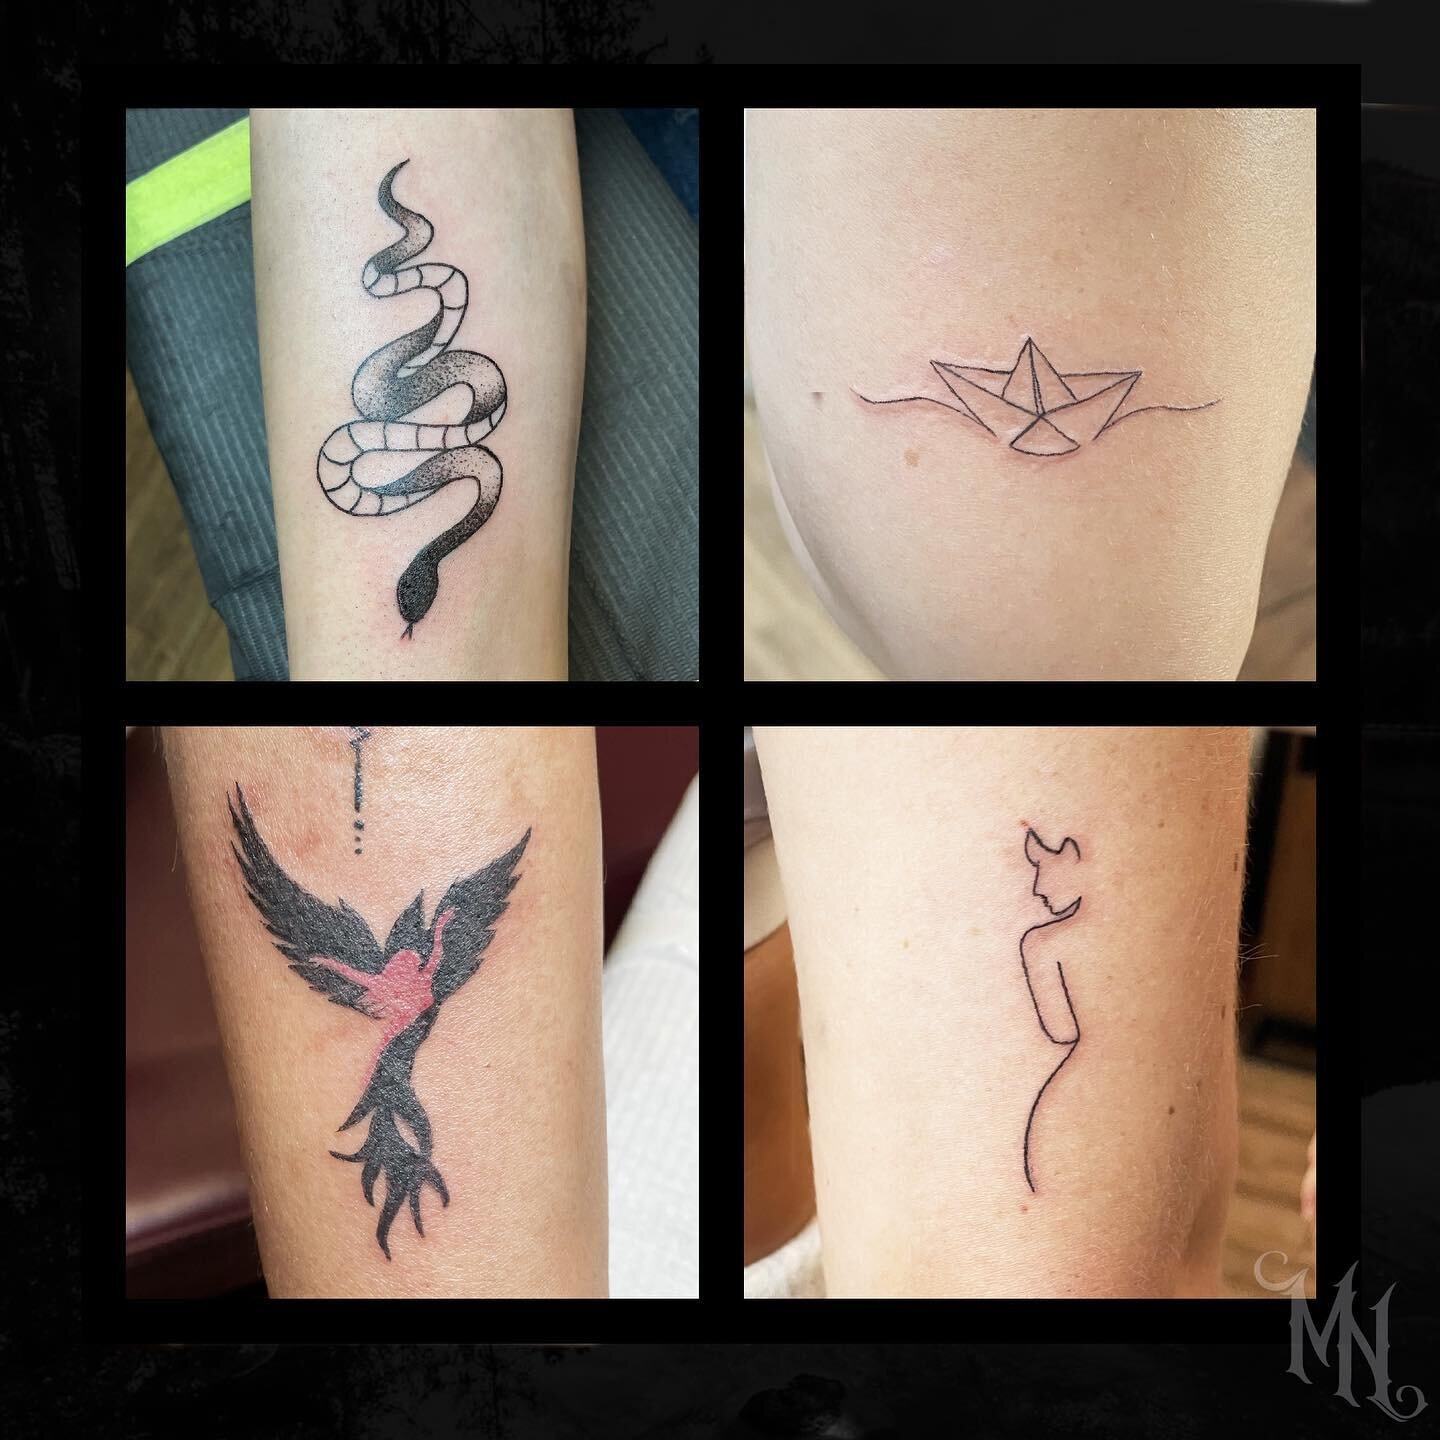 A snake, boat , Phoenix and lady tattoo 🐍 Call 905.435.7551 for bookings and inquiries #snake #snaketattoo #boat #paperboat  #paperboattattoo #phoenix #phoenixtattoo #line #linetattoo #ladytattooer #whitby #oshawa #toronto